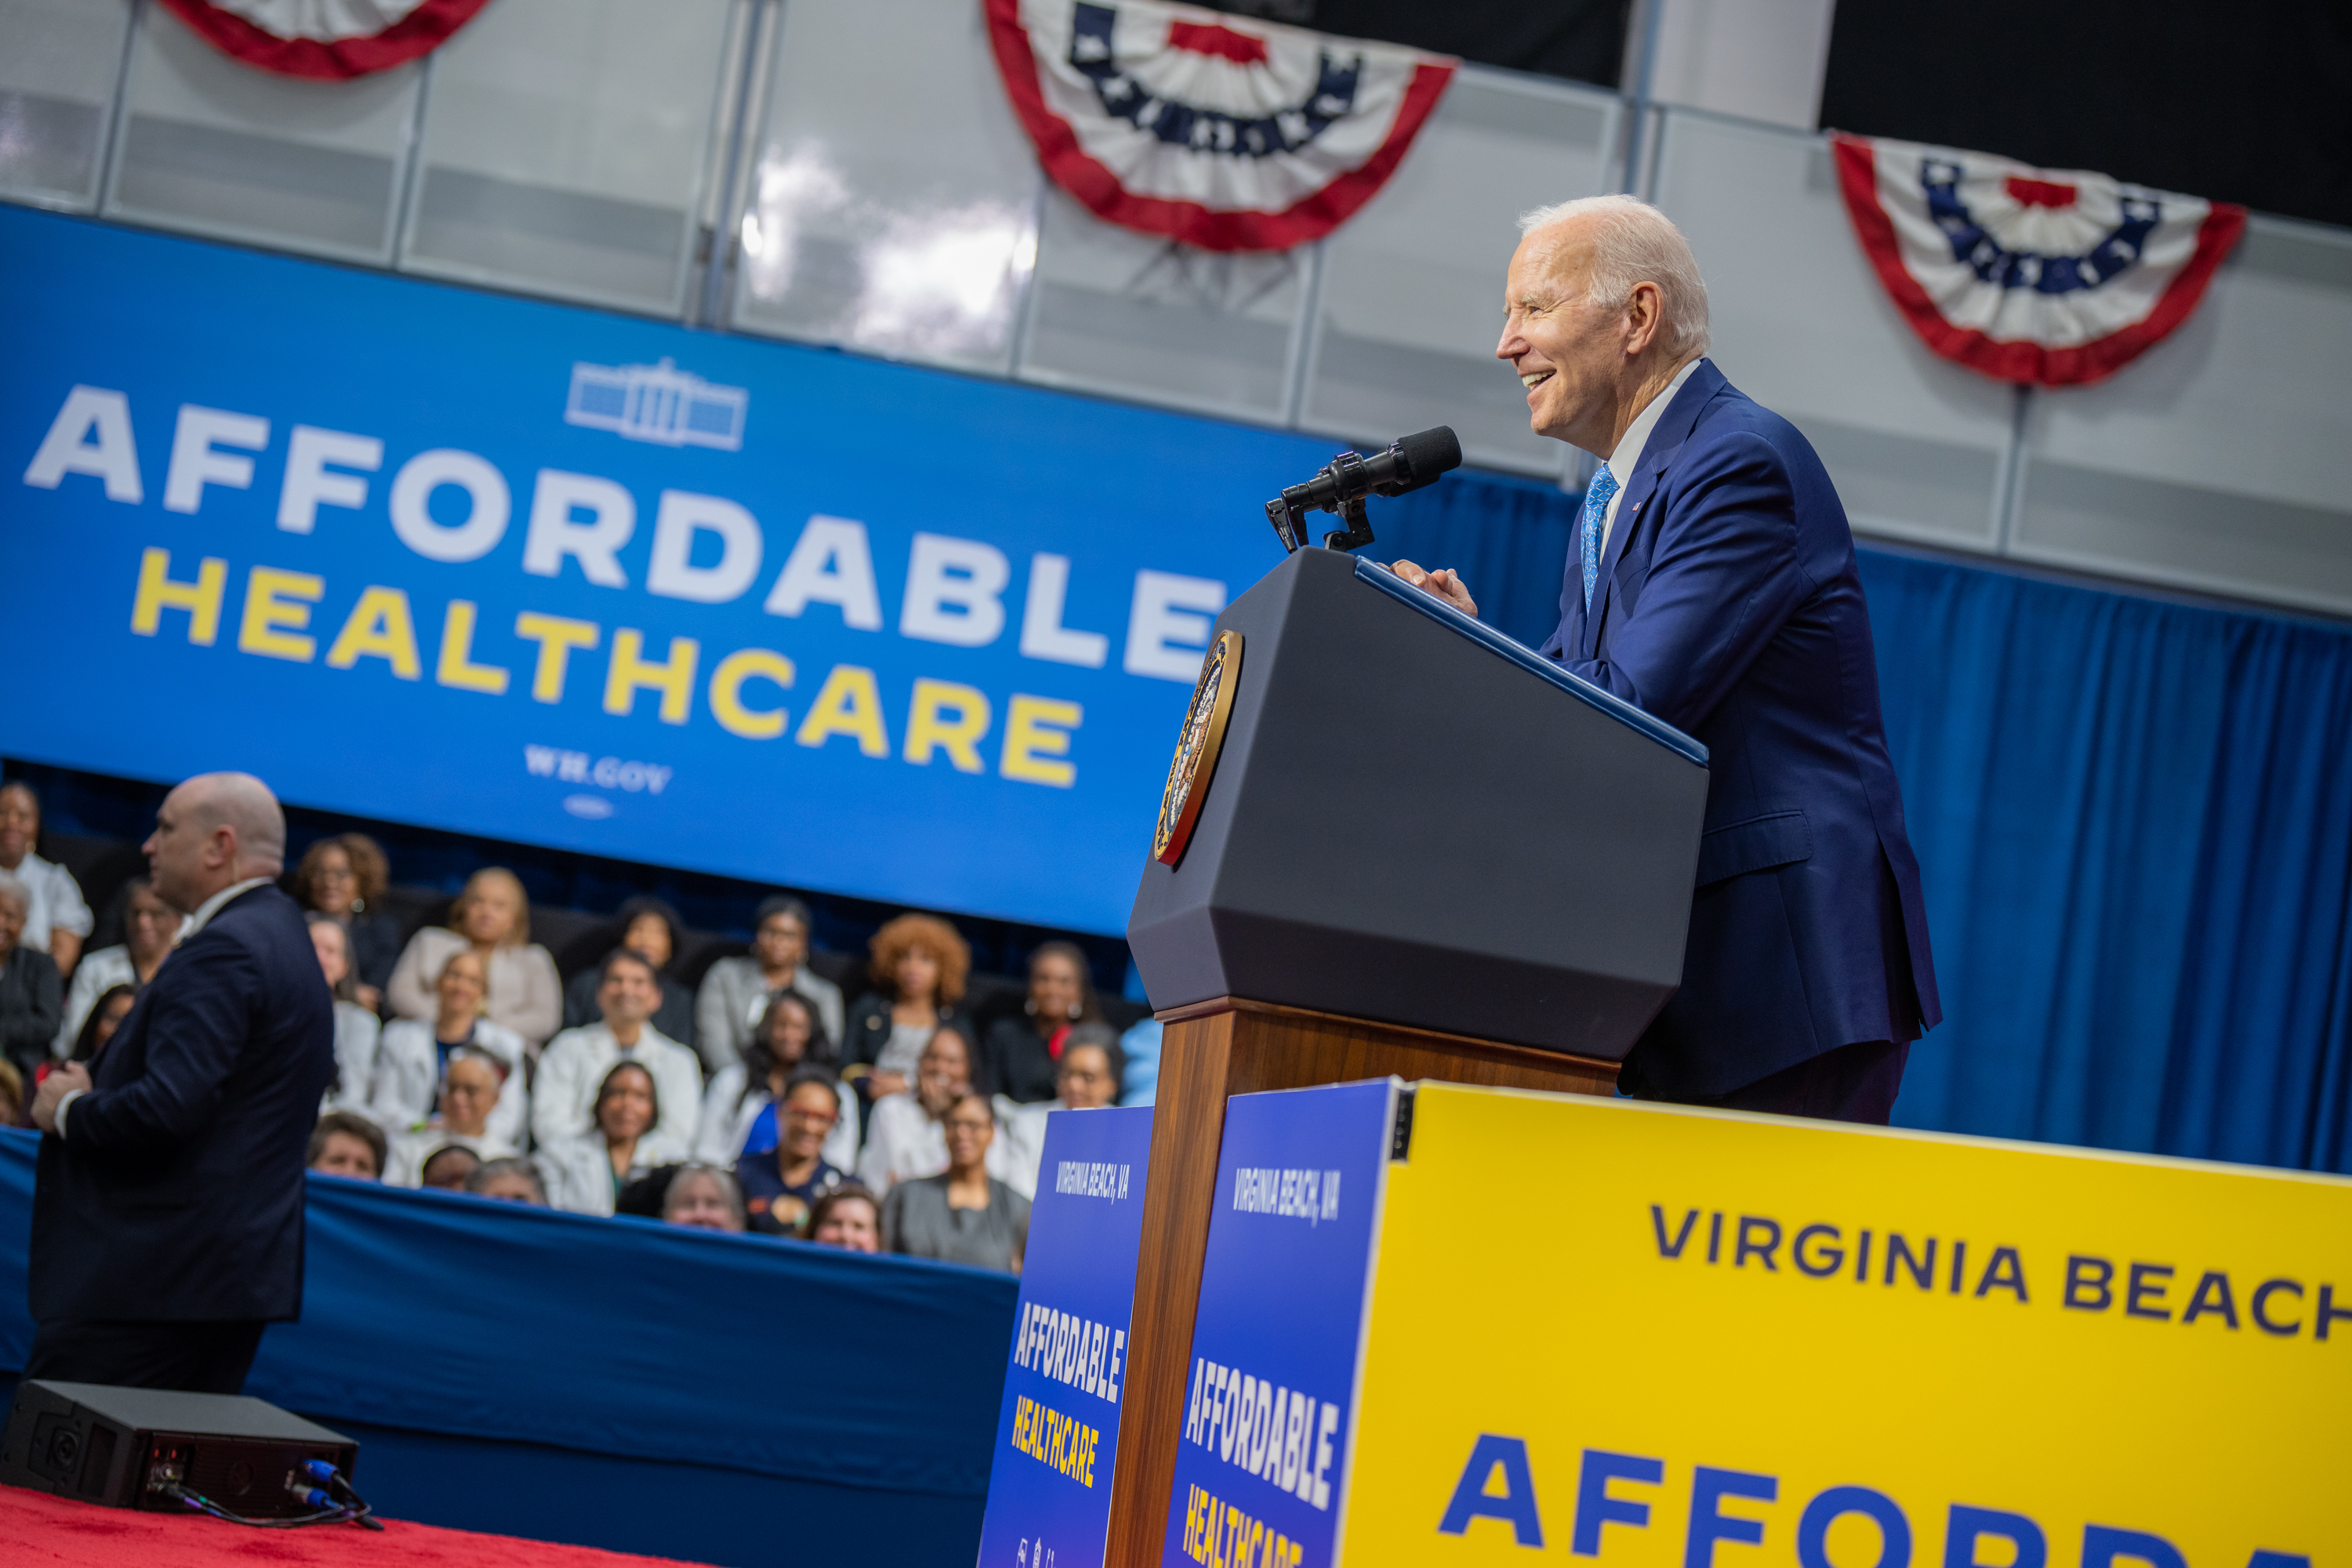 President Biden delivers remarks in front of signage that reads: "Affordable Healthcare."